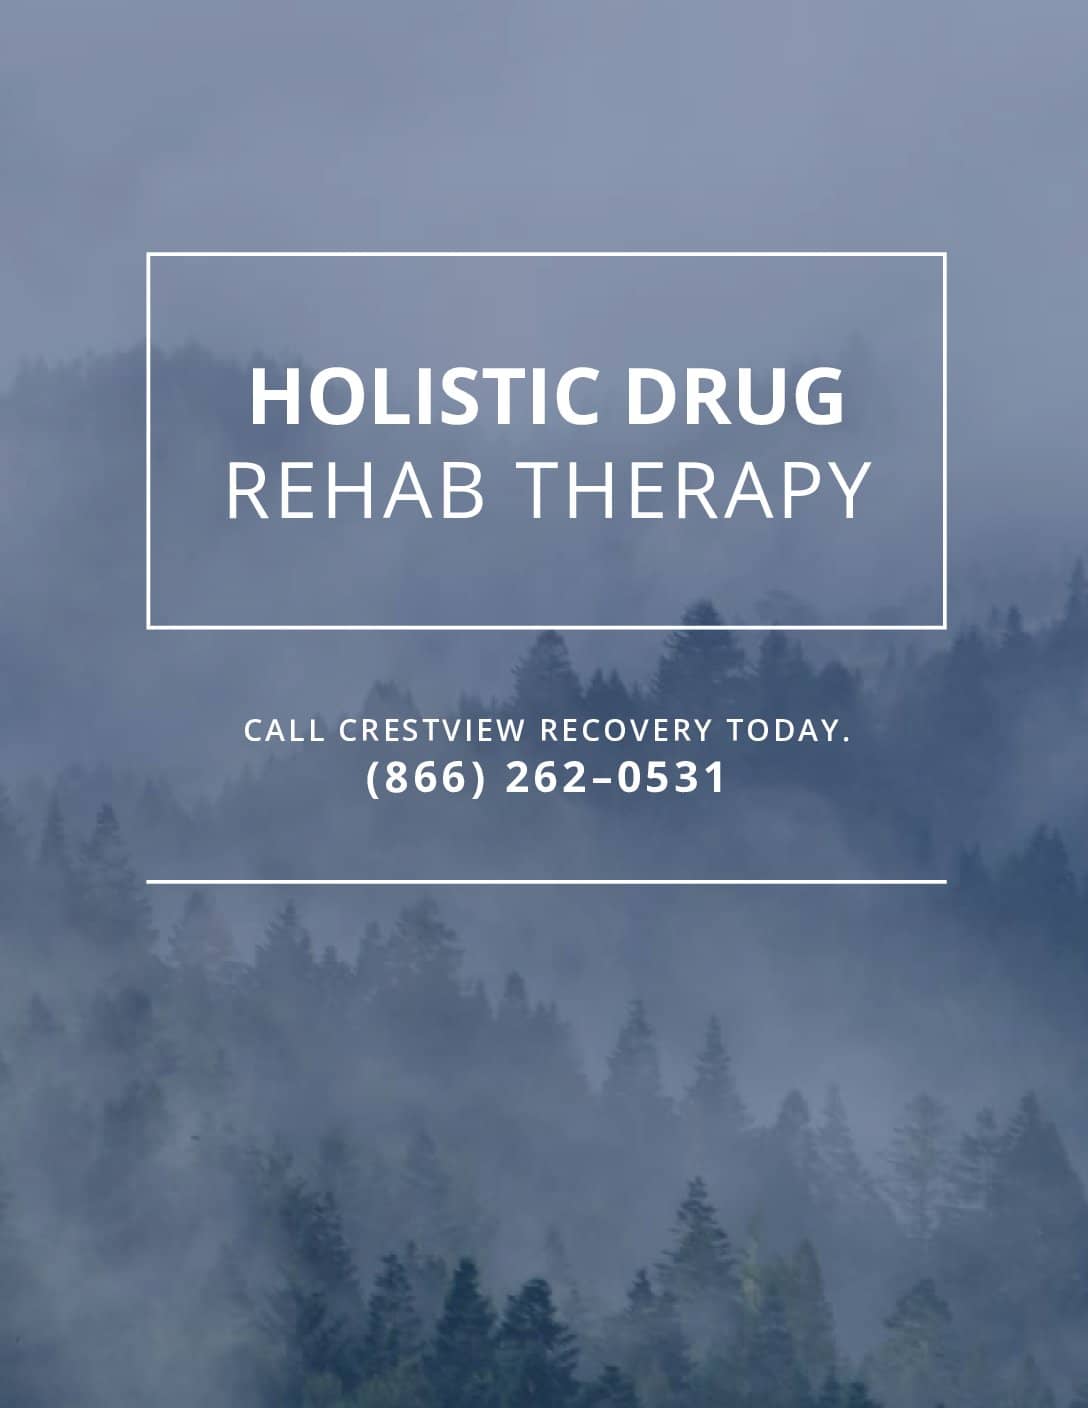 Crestview Recovery Holistic Drug Therapy Pdf